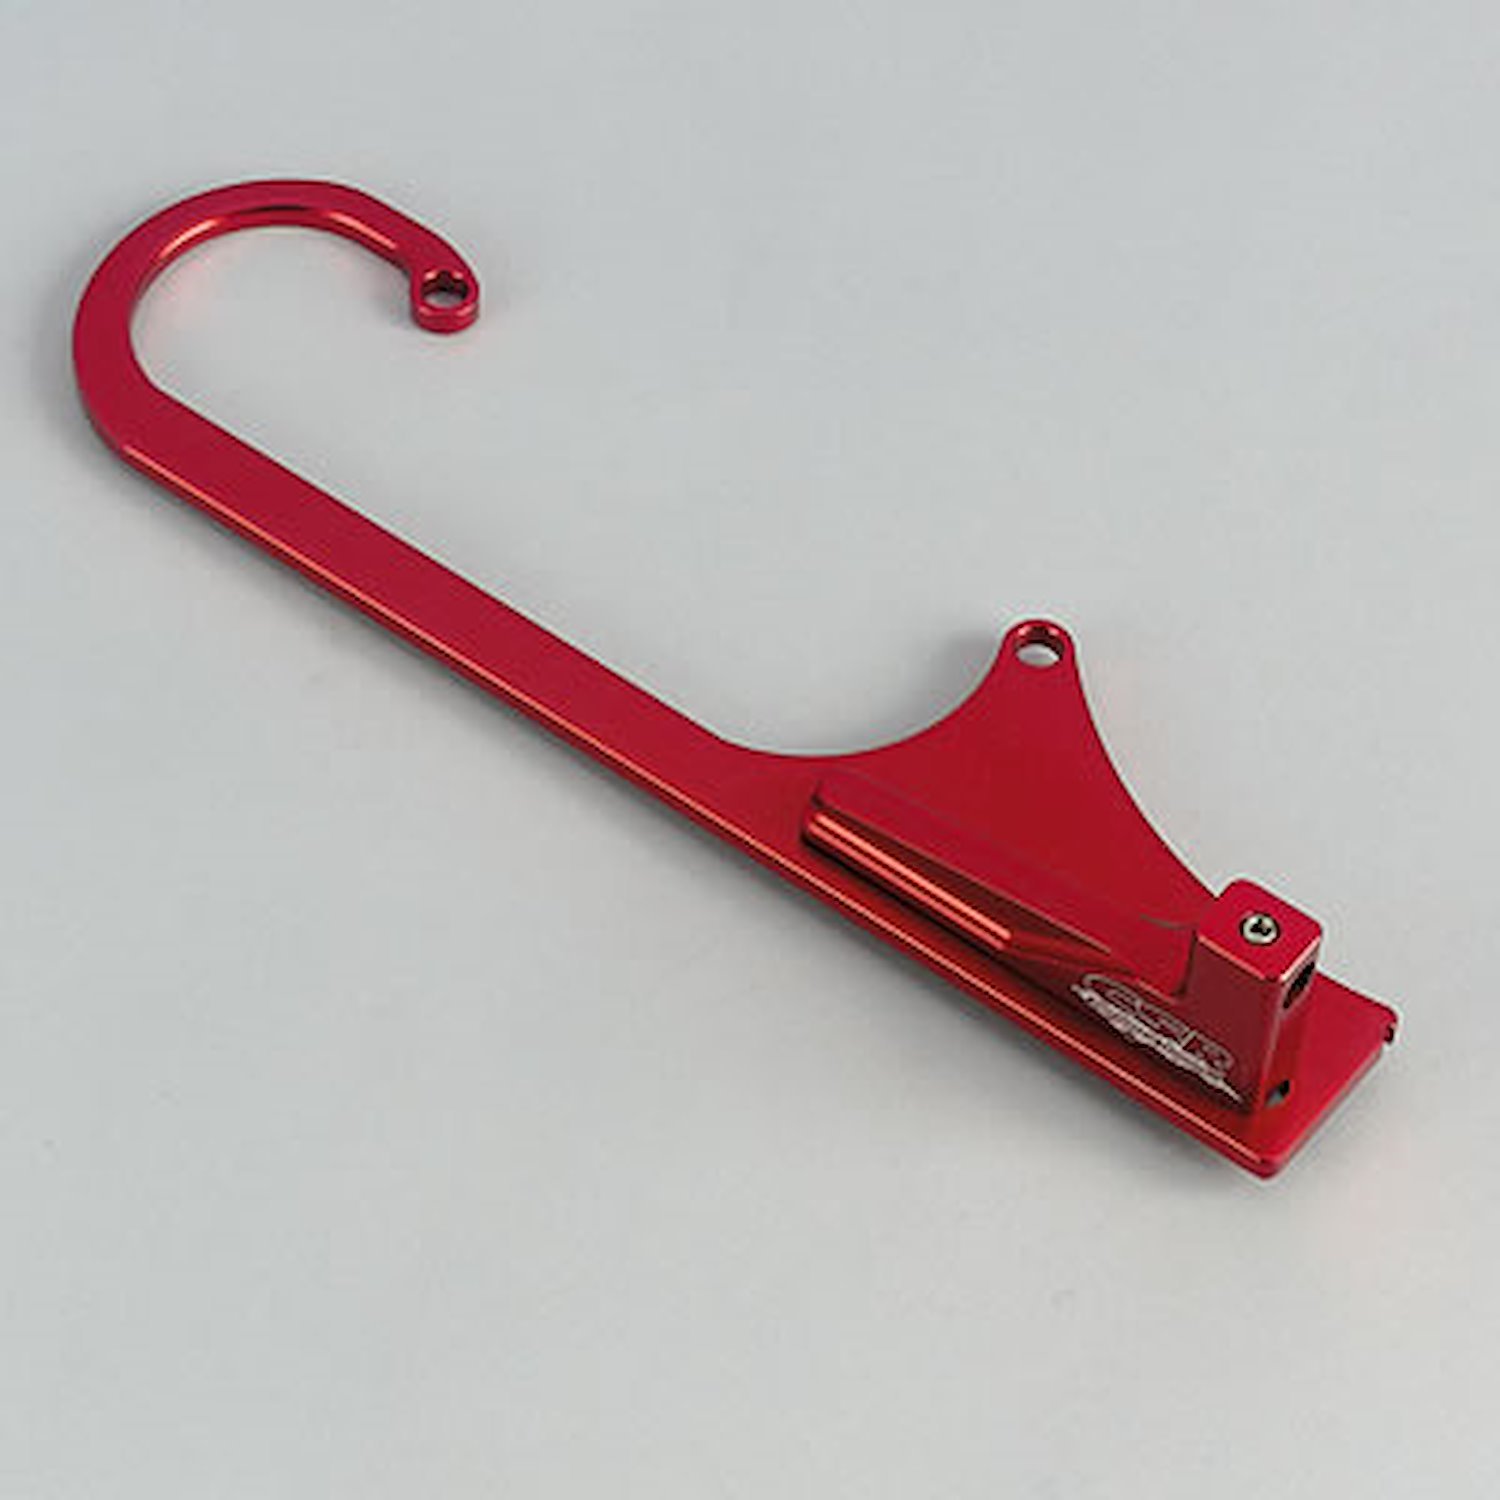 Adjustable Throttle Cable Bracket - Red Fits 4150/4160/3310 Series Holley 750 with Morse Style 33-C Cable